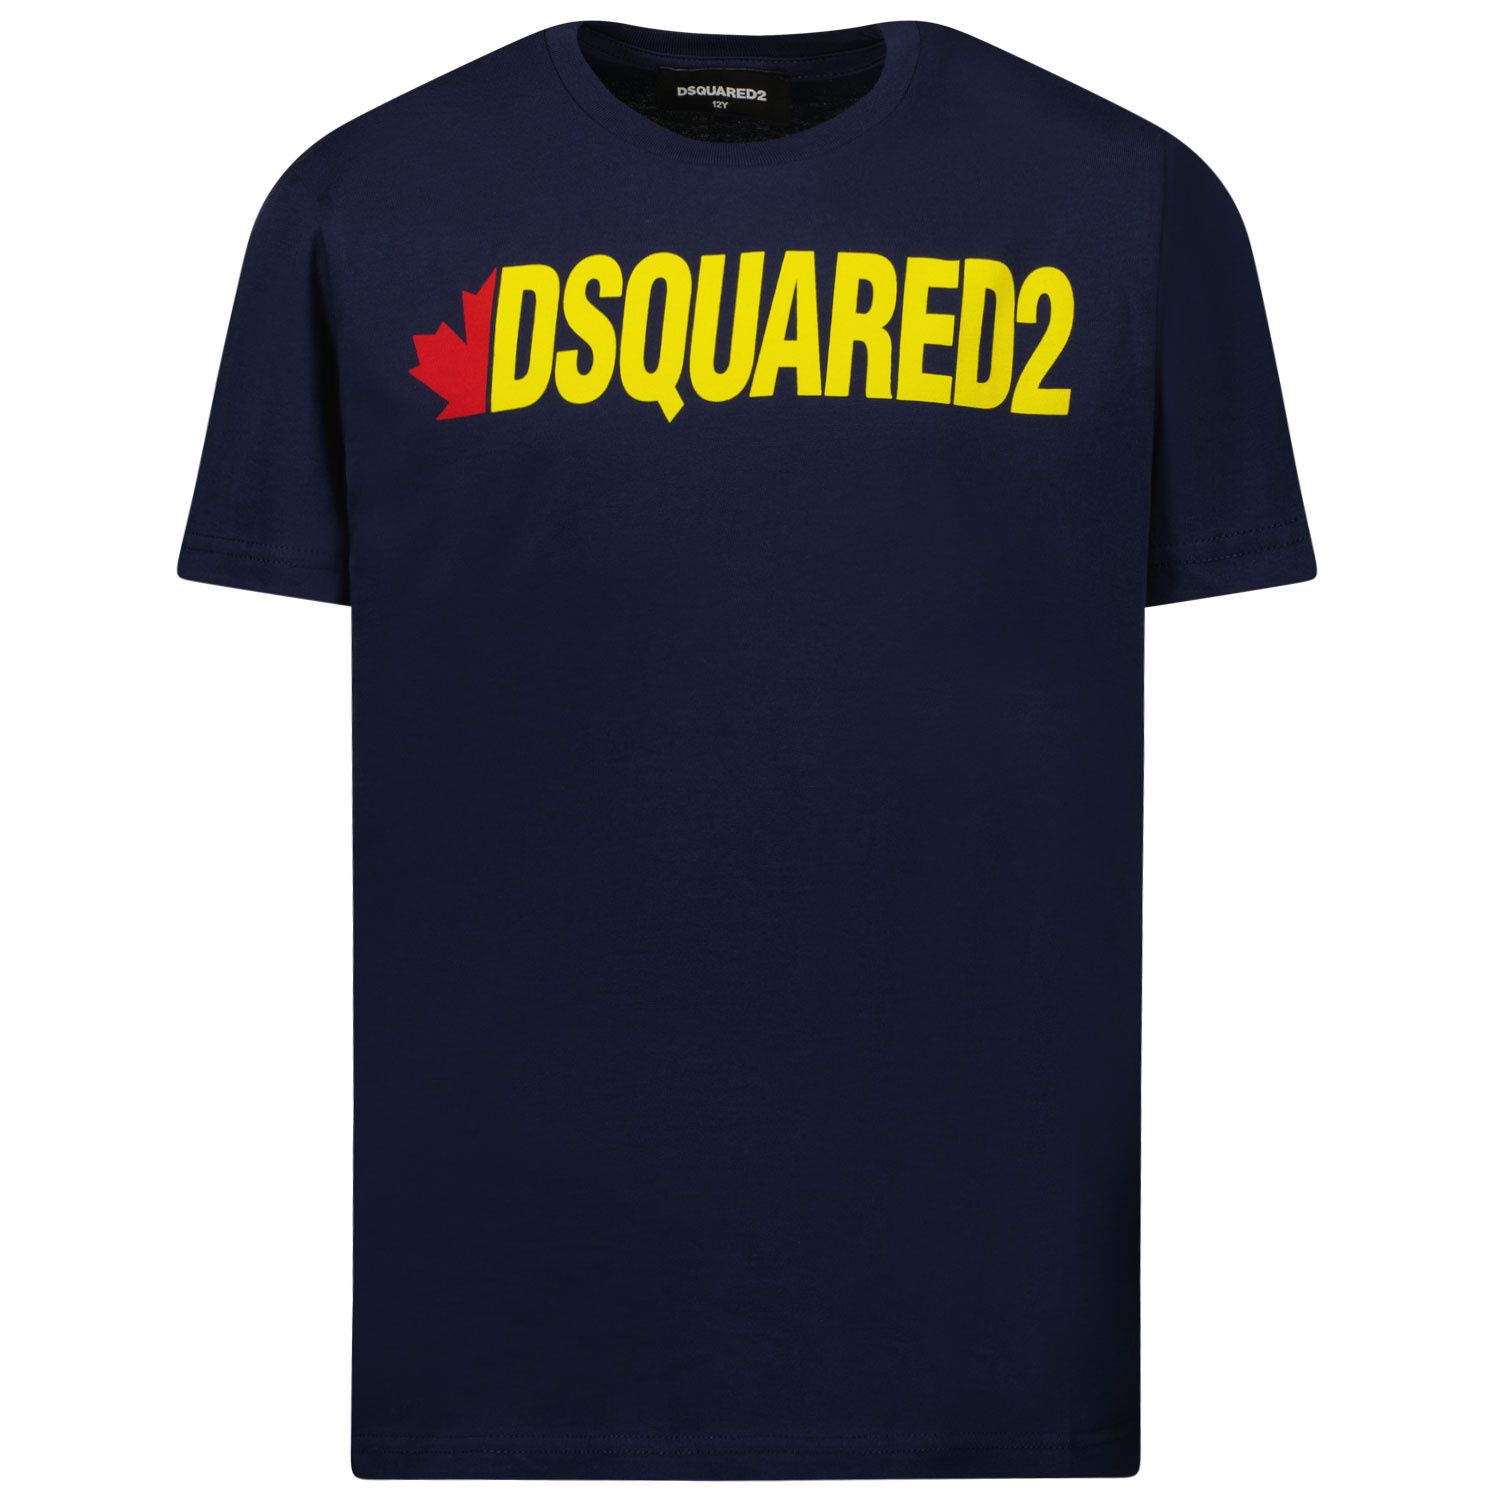 Picture of Dsquared2 DQ0798 kids t-shirt navy